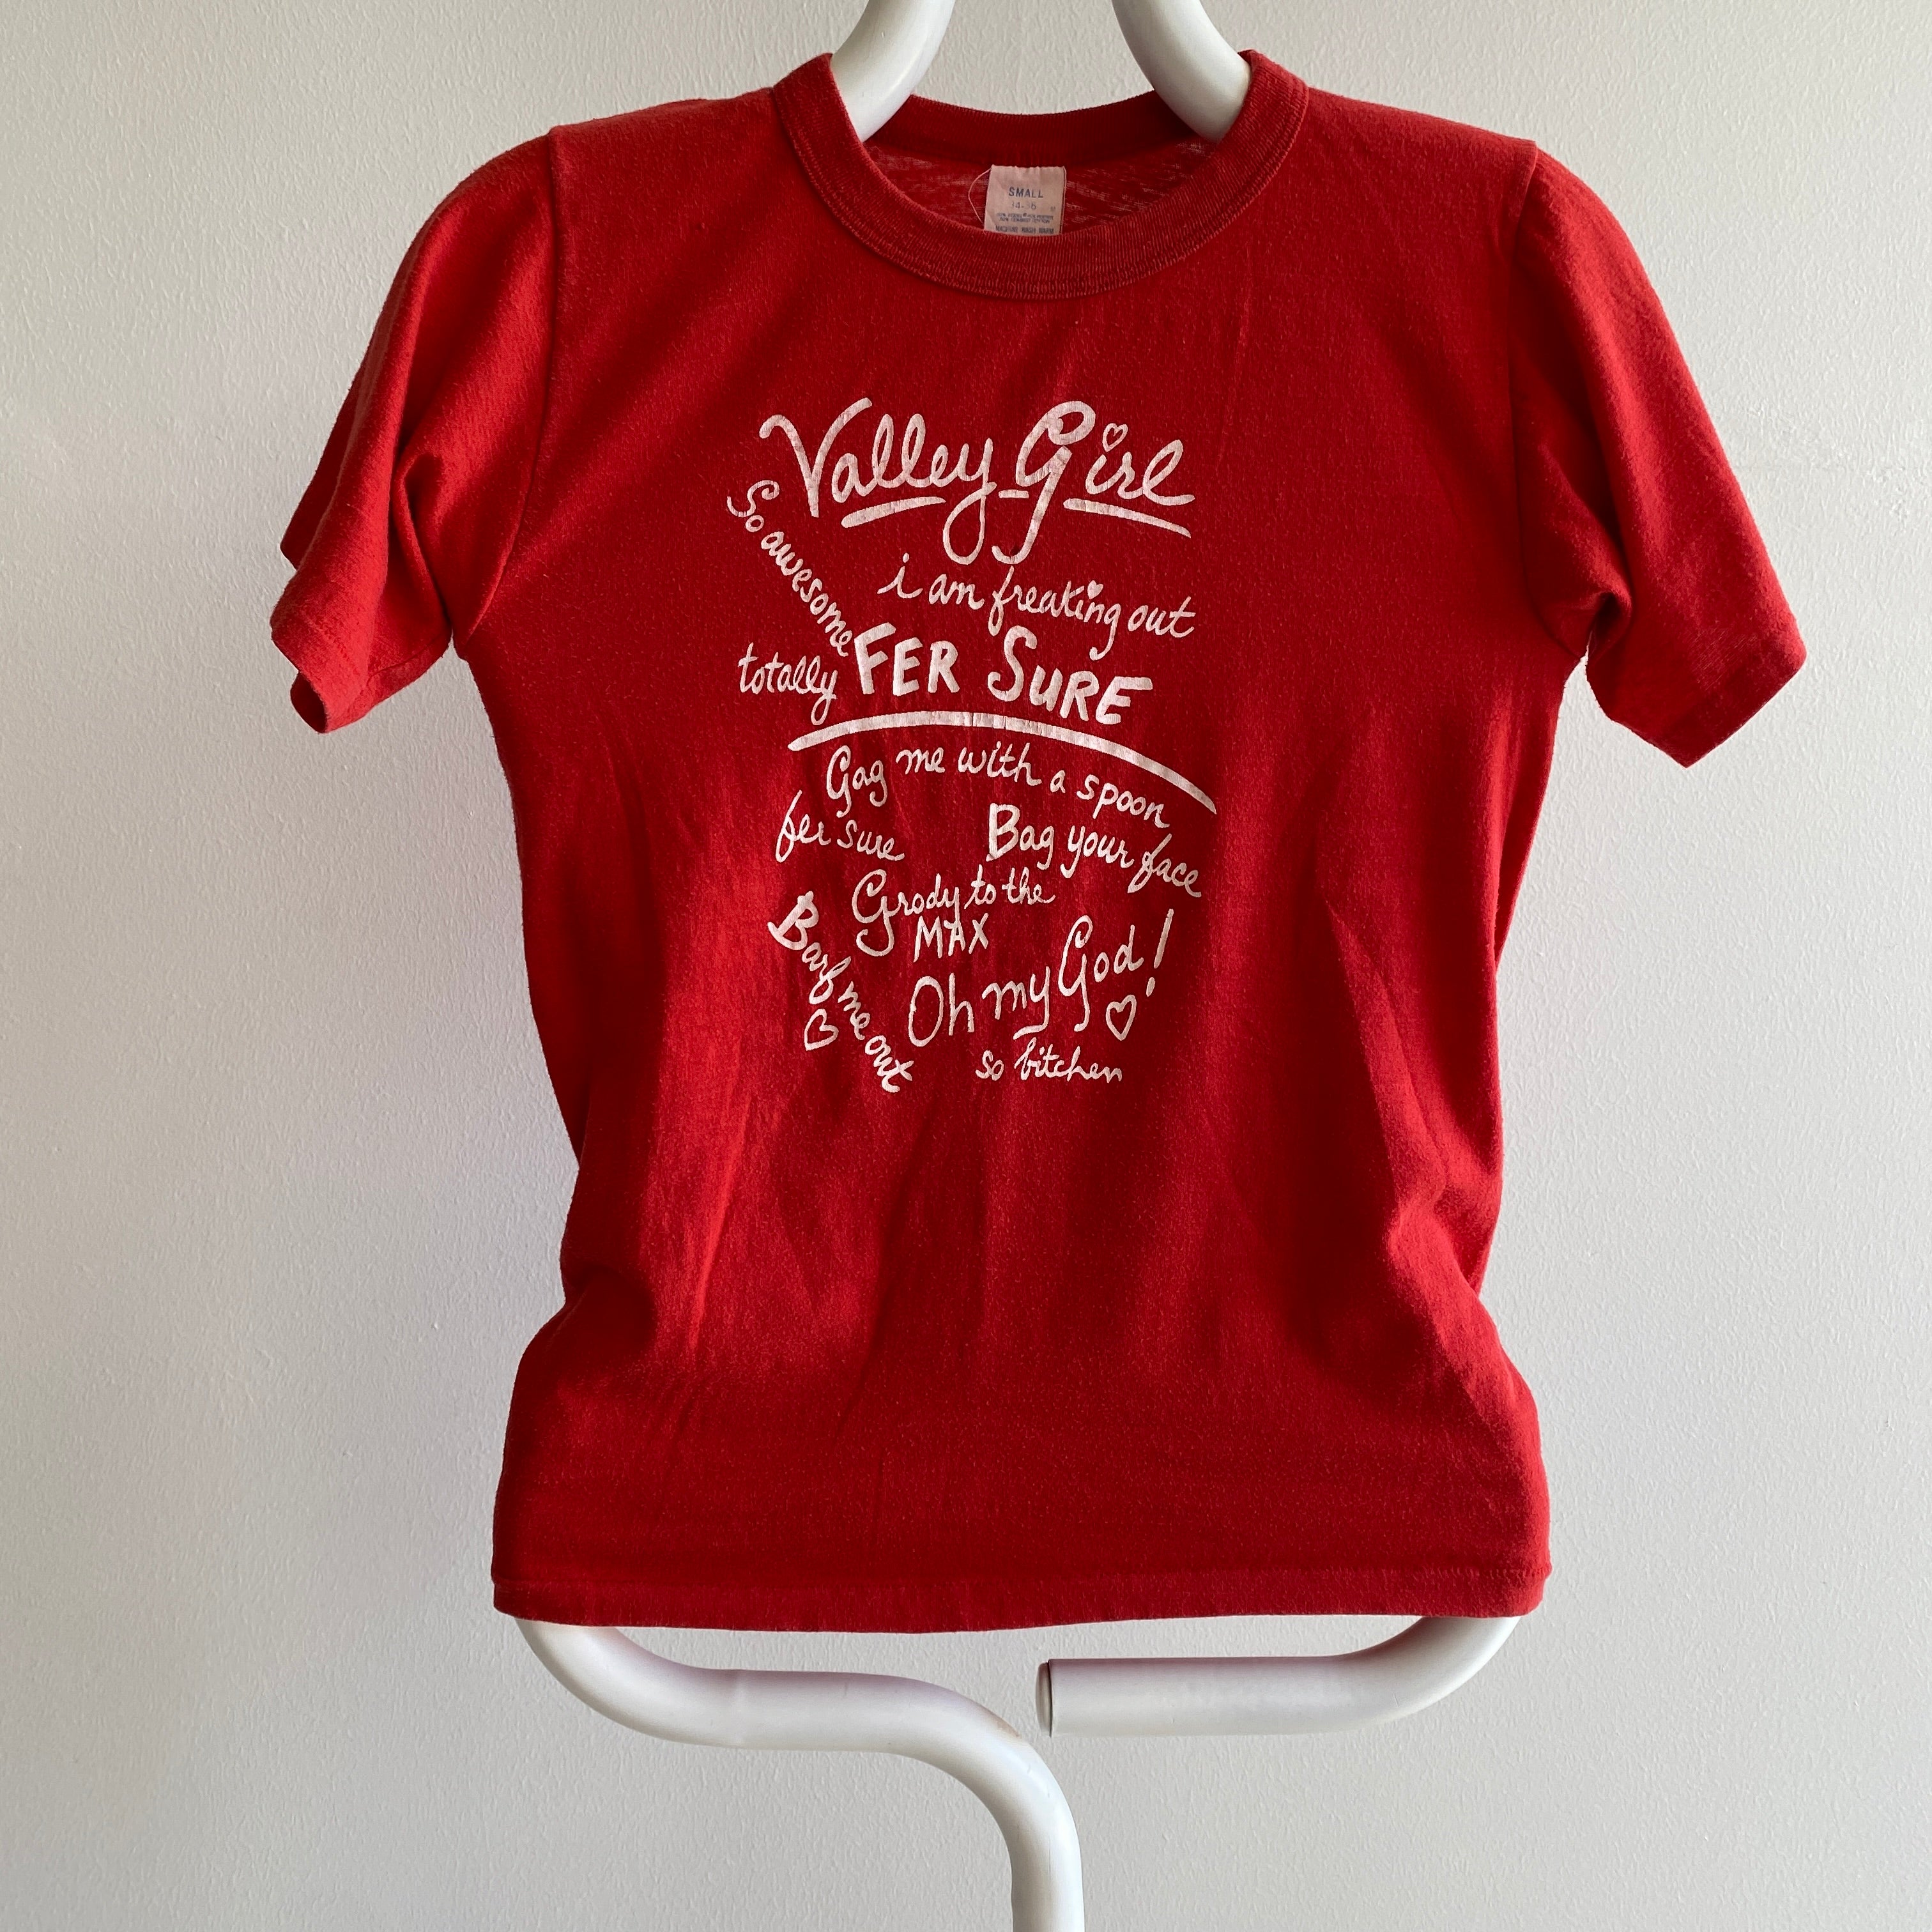 1980s Valley Girl Slang Tee - Shout Out To The 818!!